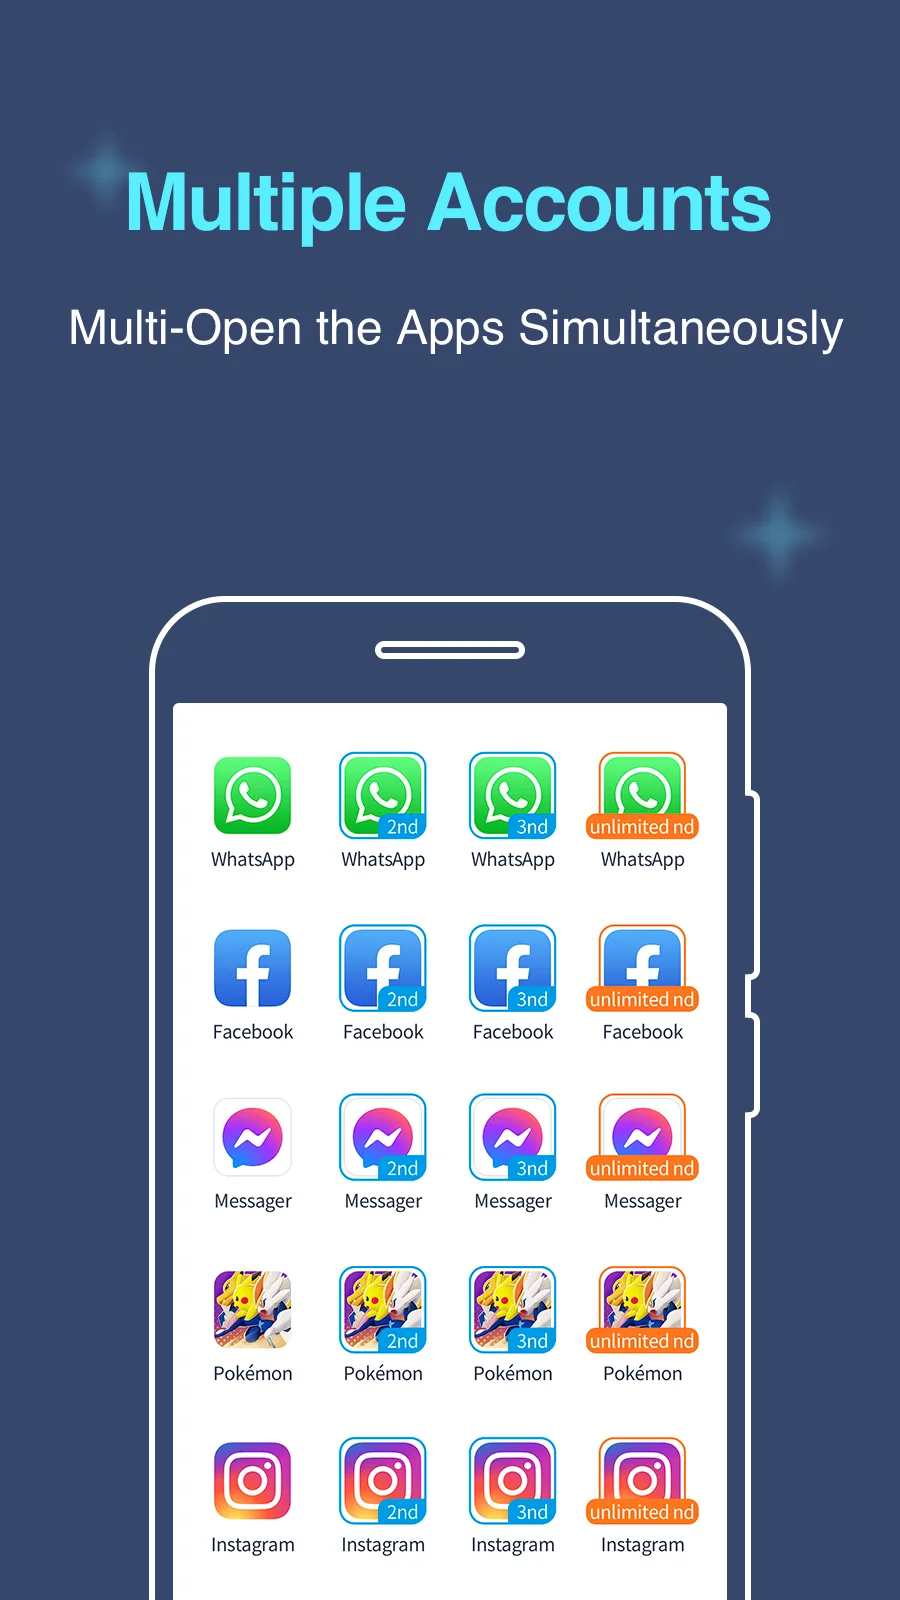 unnamed 22 1 - Multiple Accounts Mod Apk v4.3.3 (No Ads) Latest Version